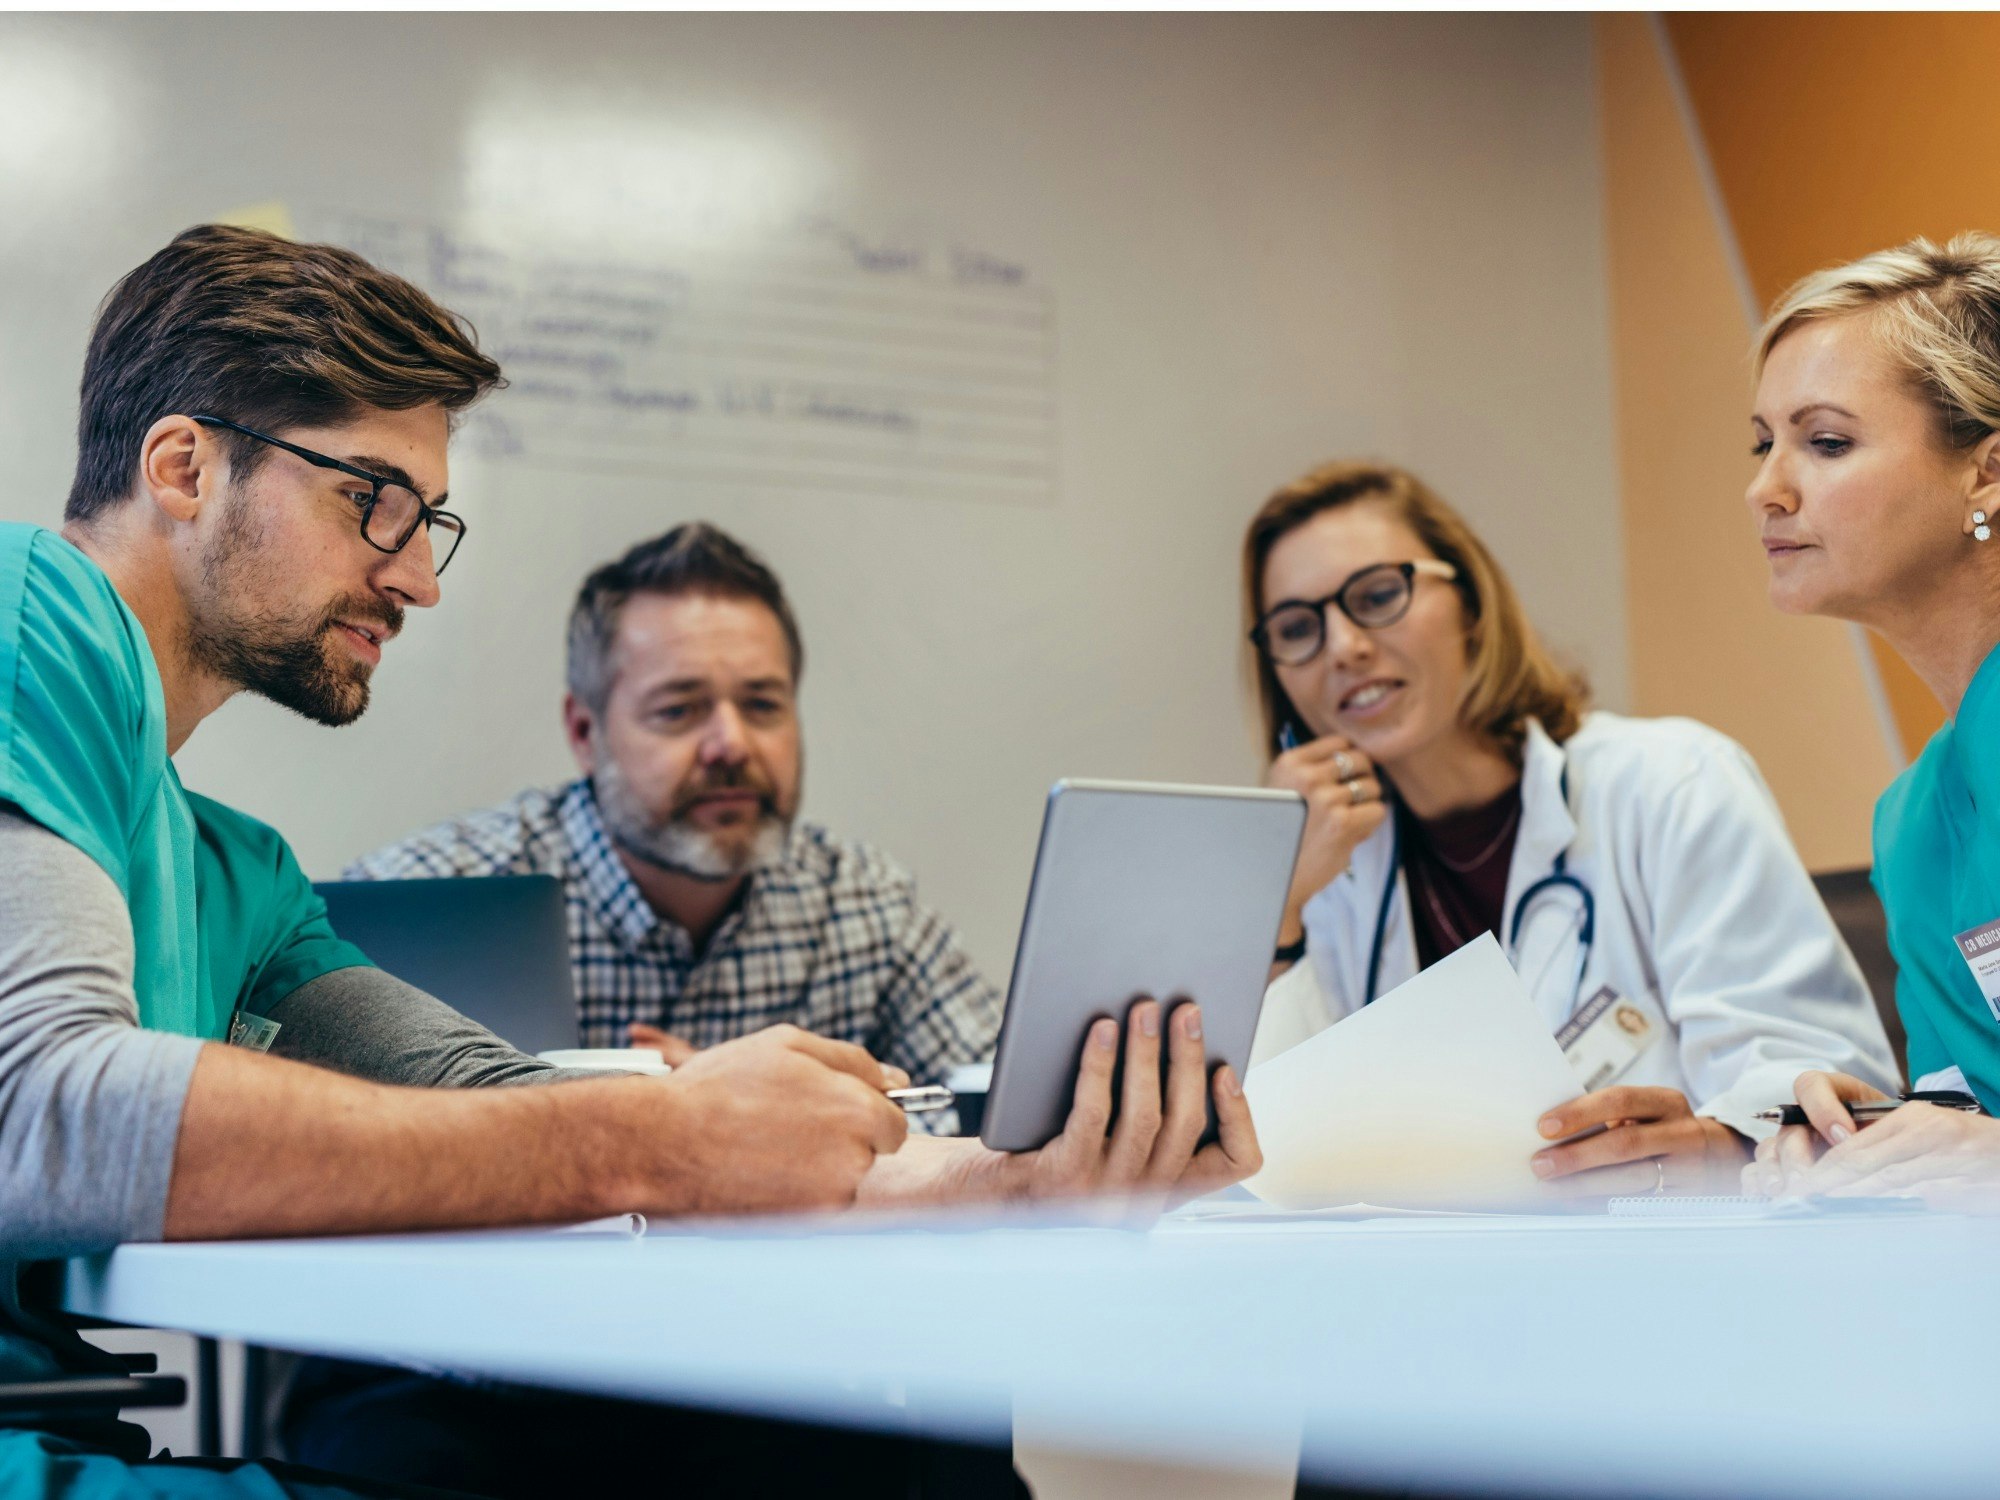 &#8220;The aim of the care huddle is to present current information about care needs in a concise way that is easily understood.&#8221; (Source: iStock) 
